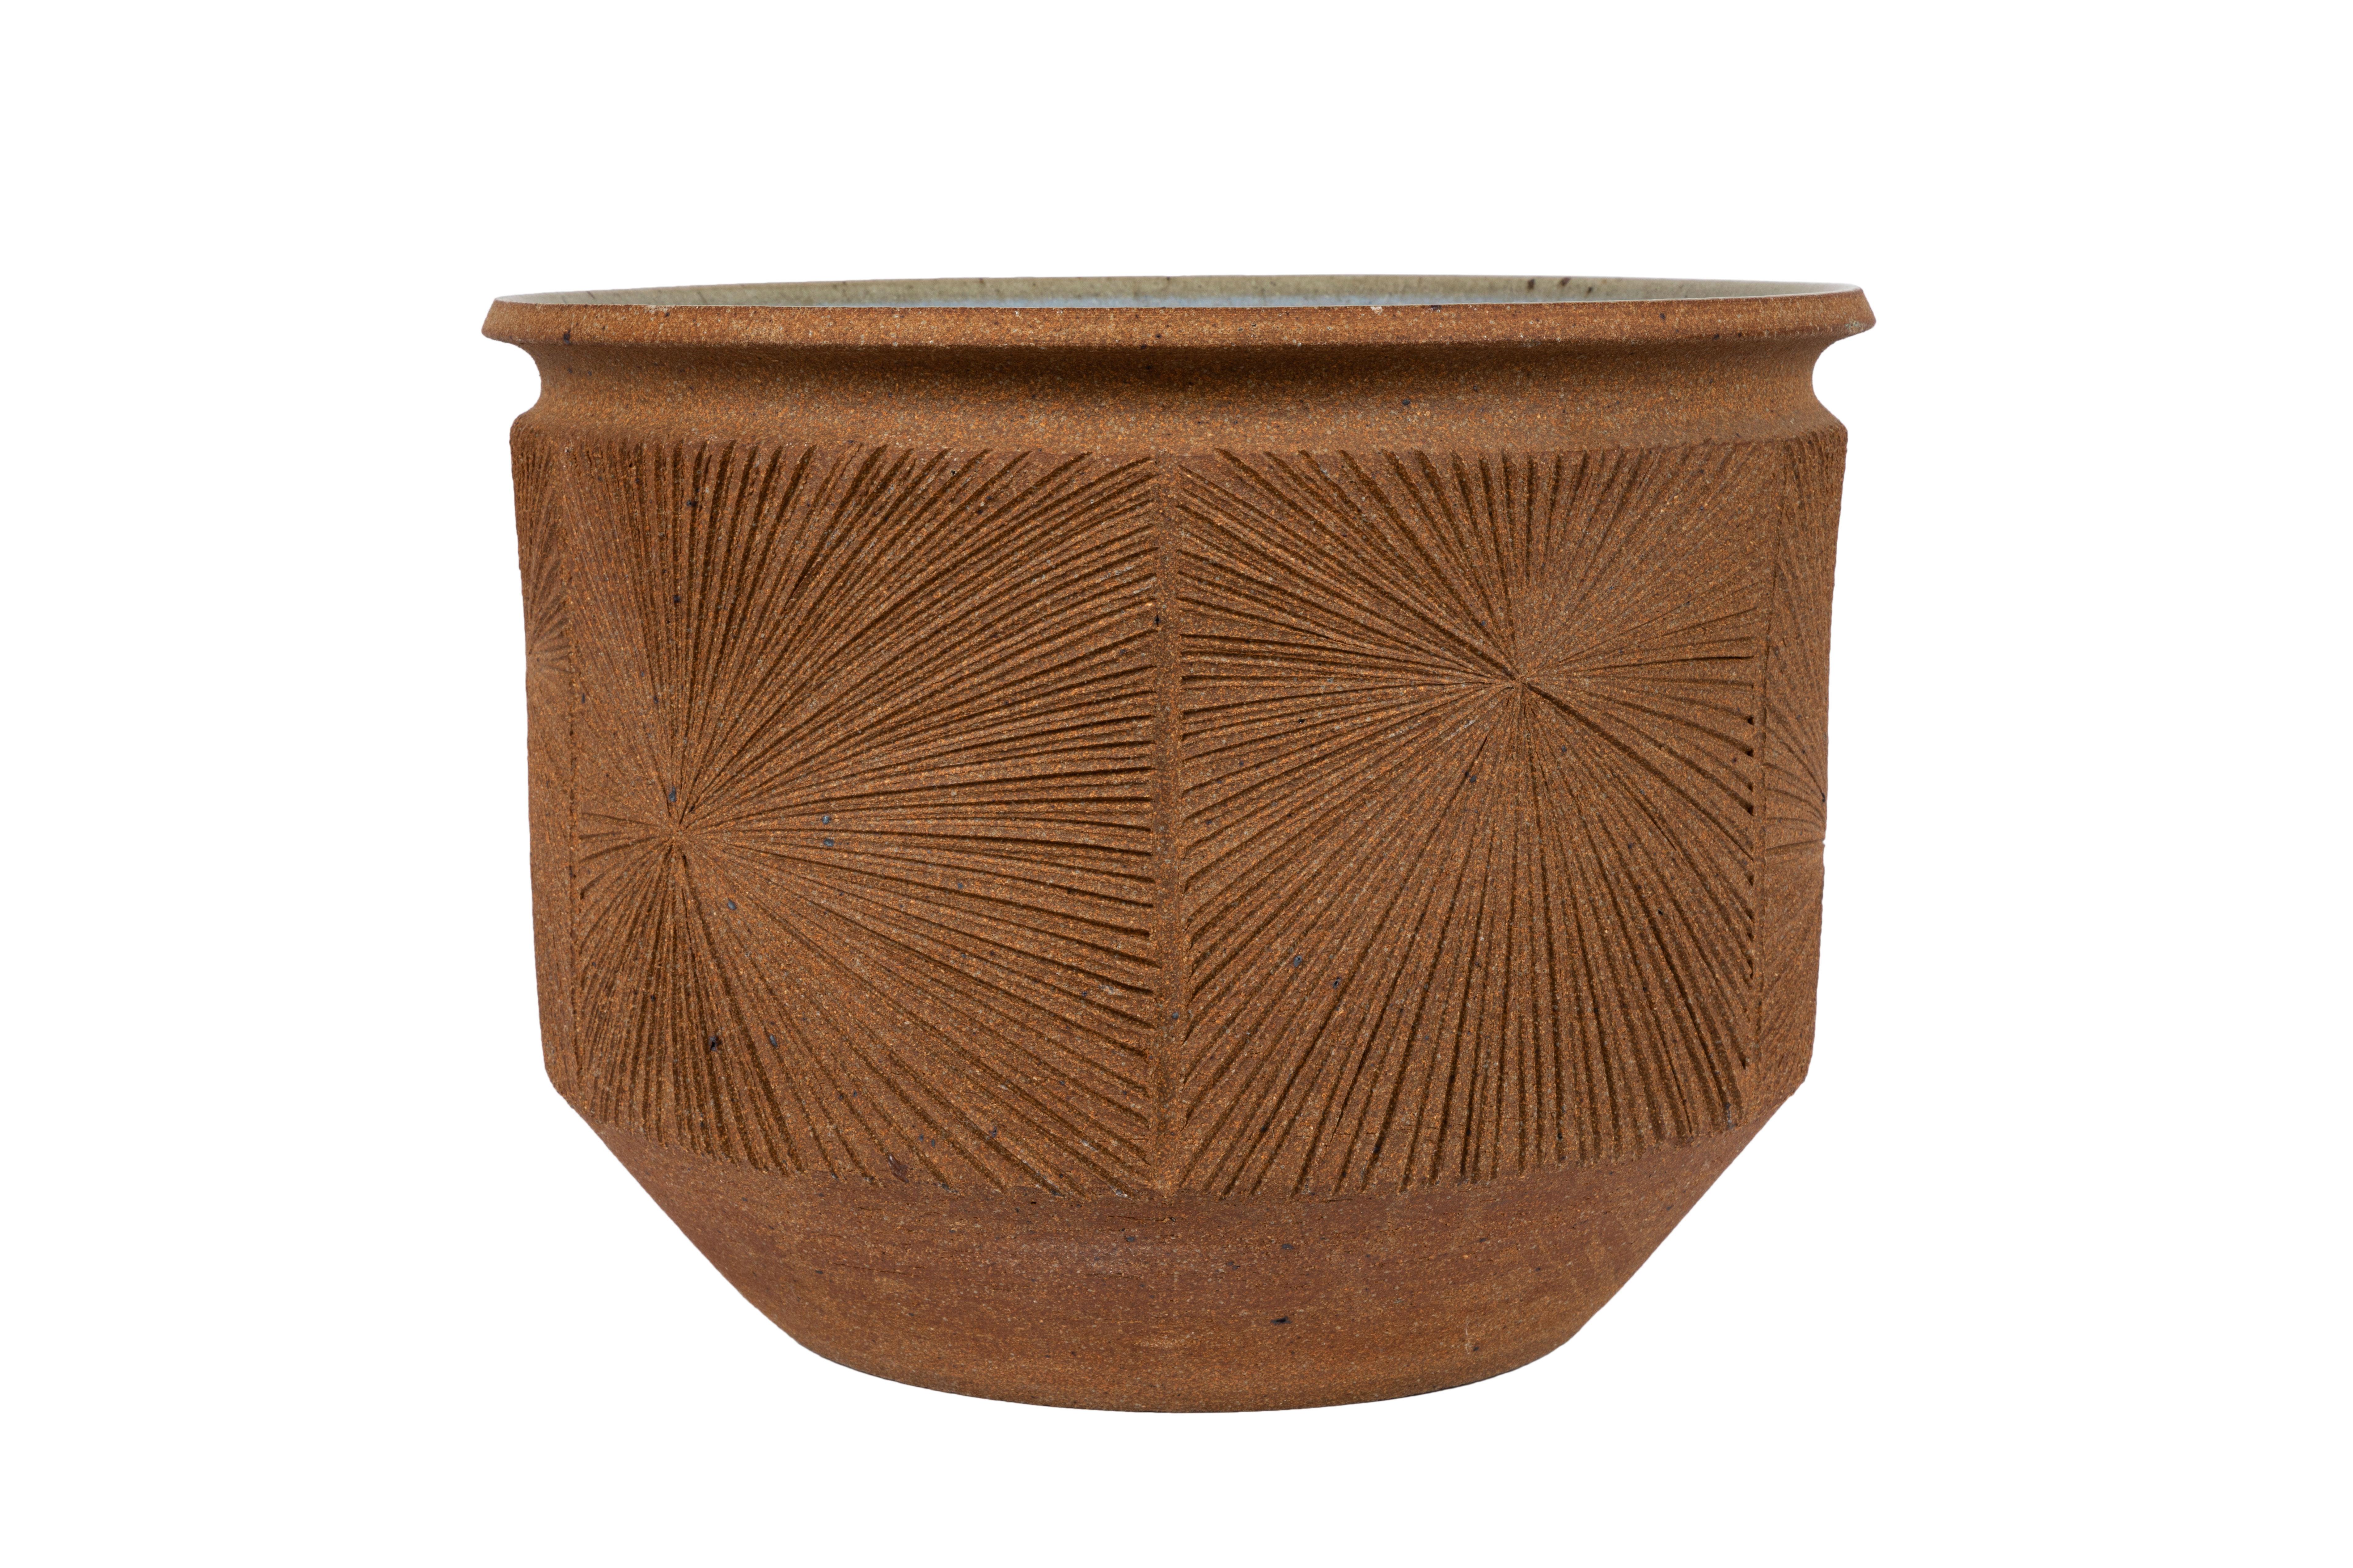 Large Robert Maxwell & David Cressey Sunburst planter for Earthgender. Studio executed in hand etched textured earthenware with a stunning interior colored glaze. A very clean example of an increasingly rare and collectible design collective that